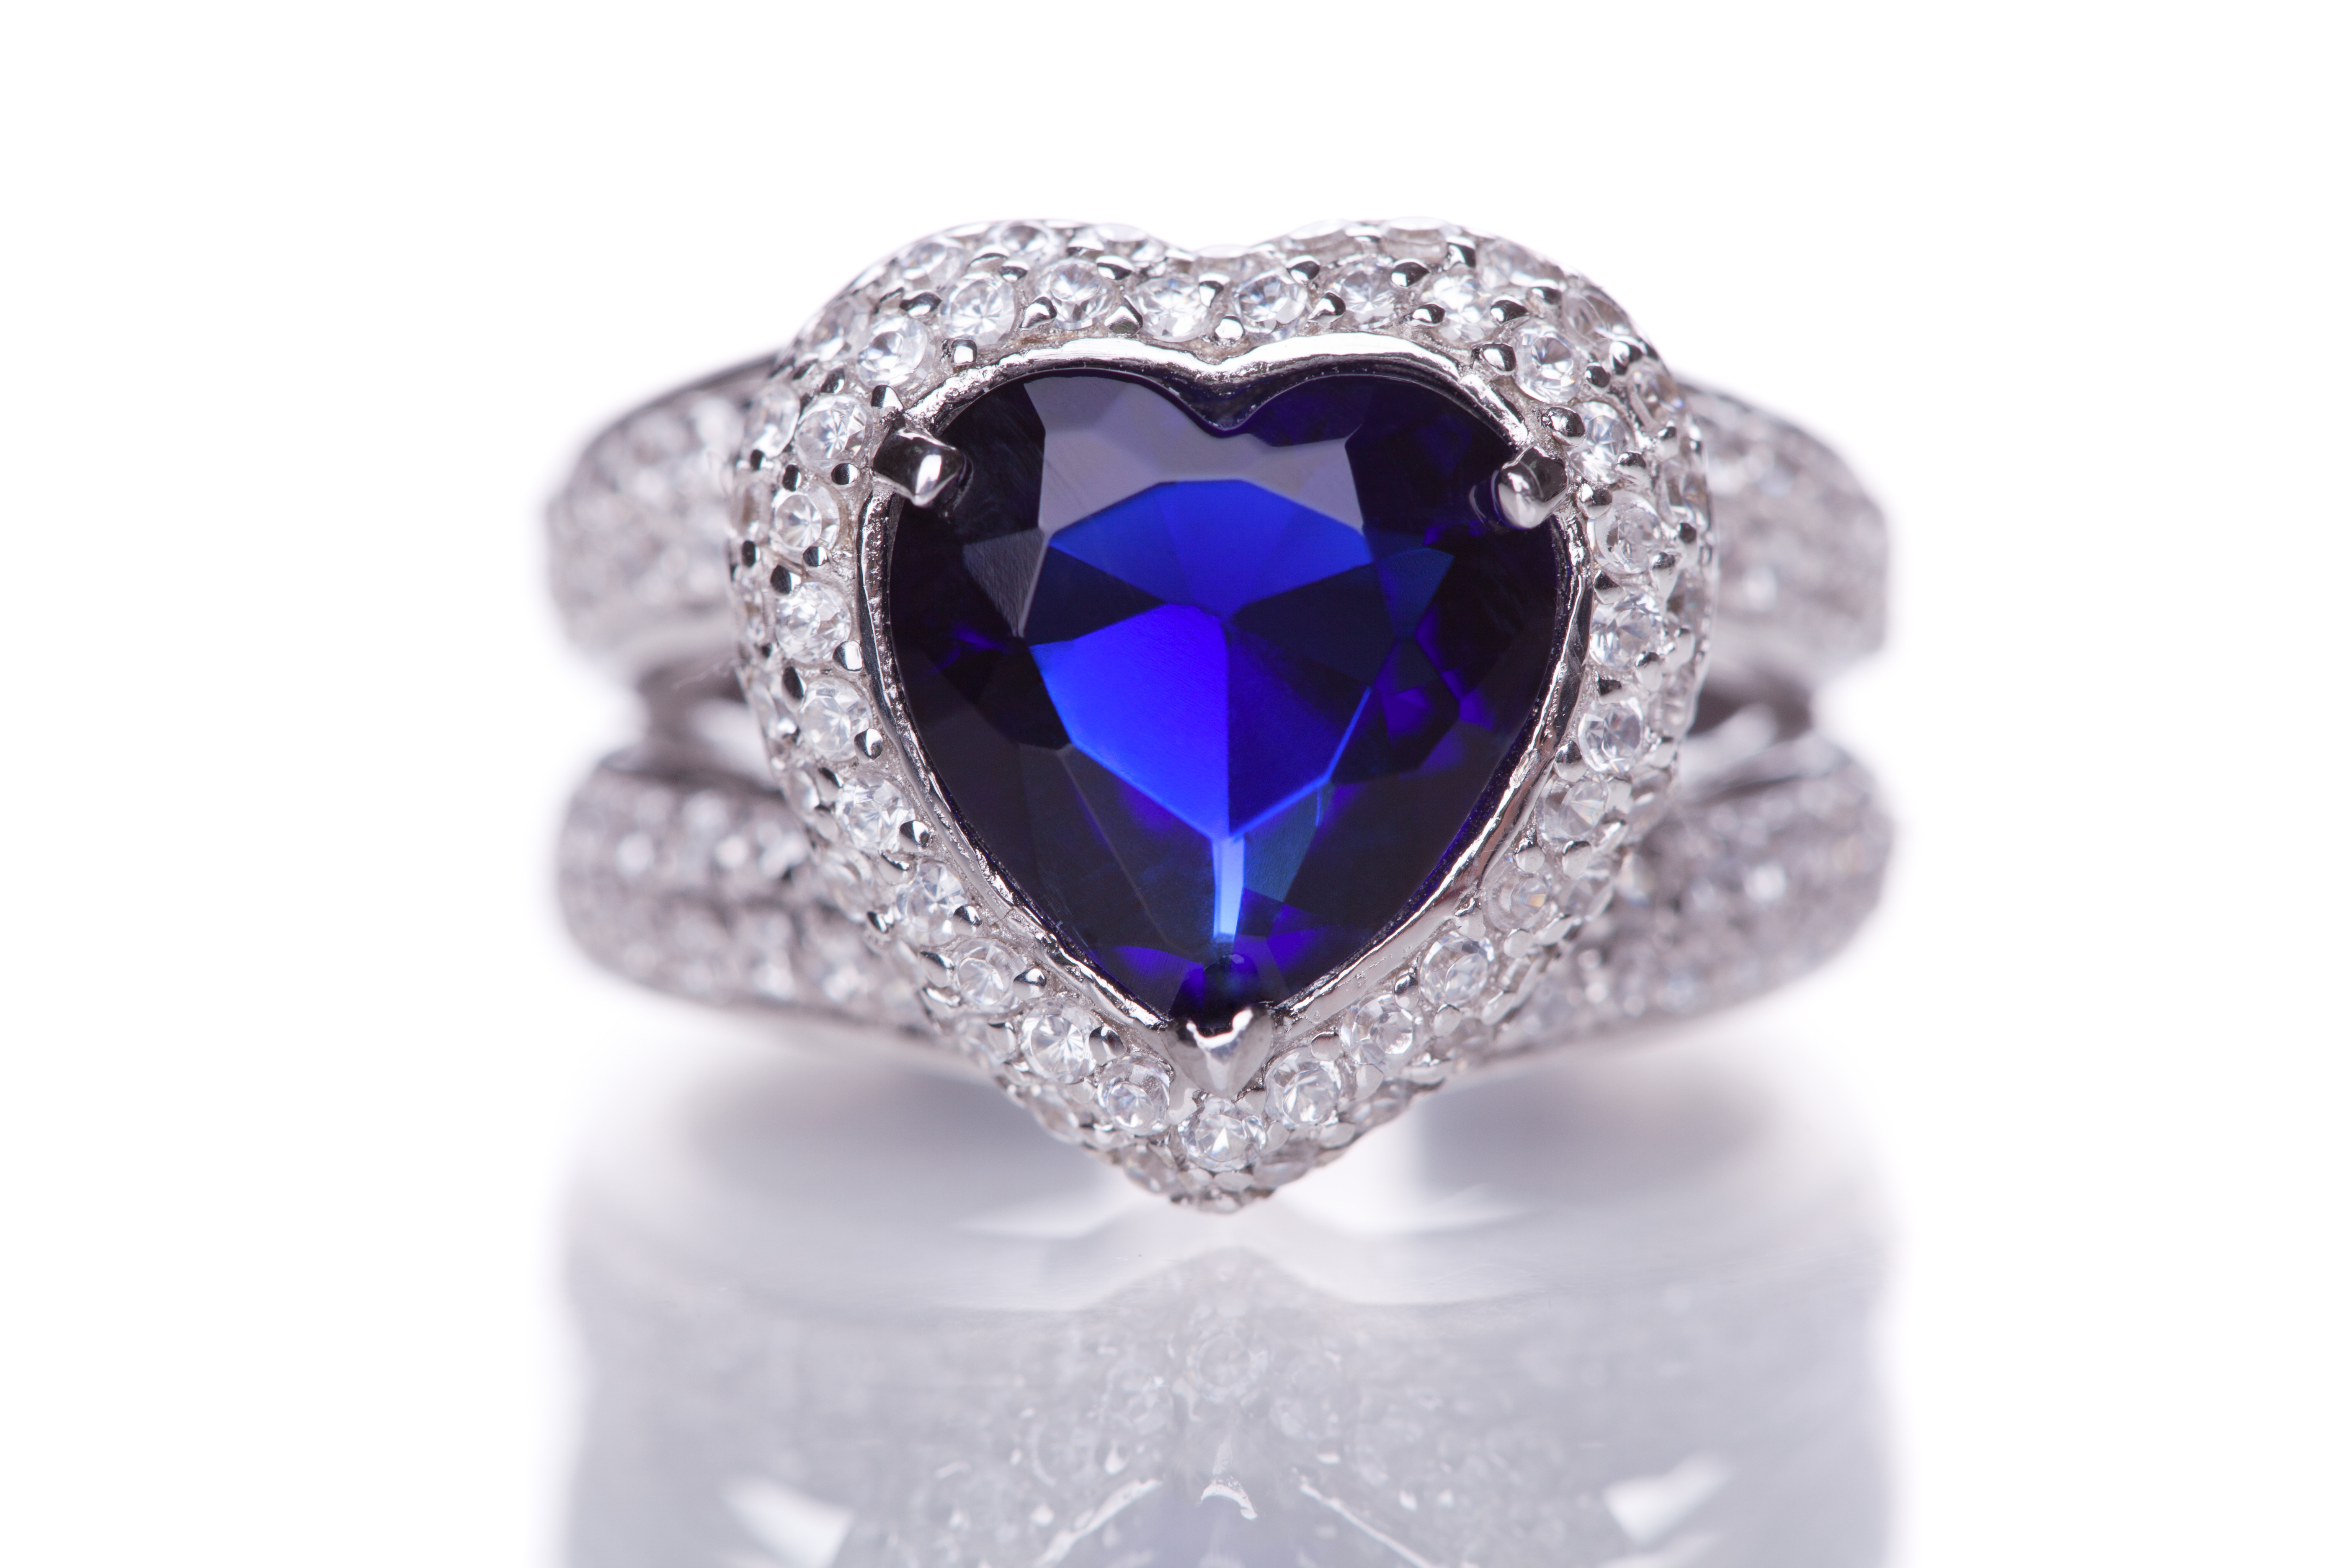 A heart-shaped ring | Source: Getty Images